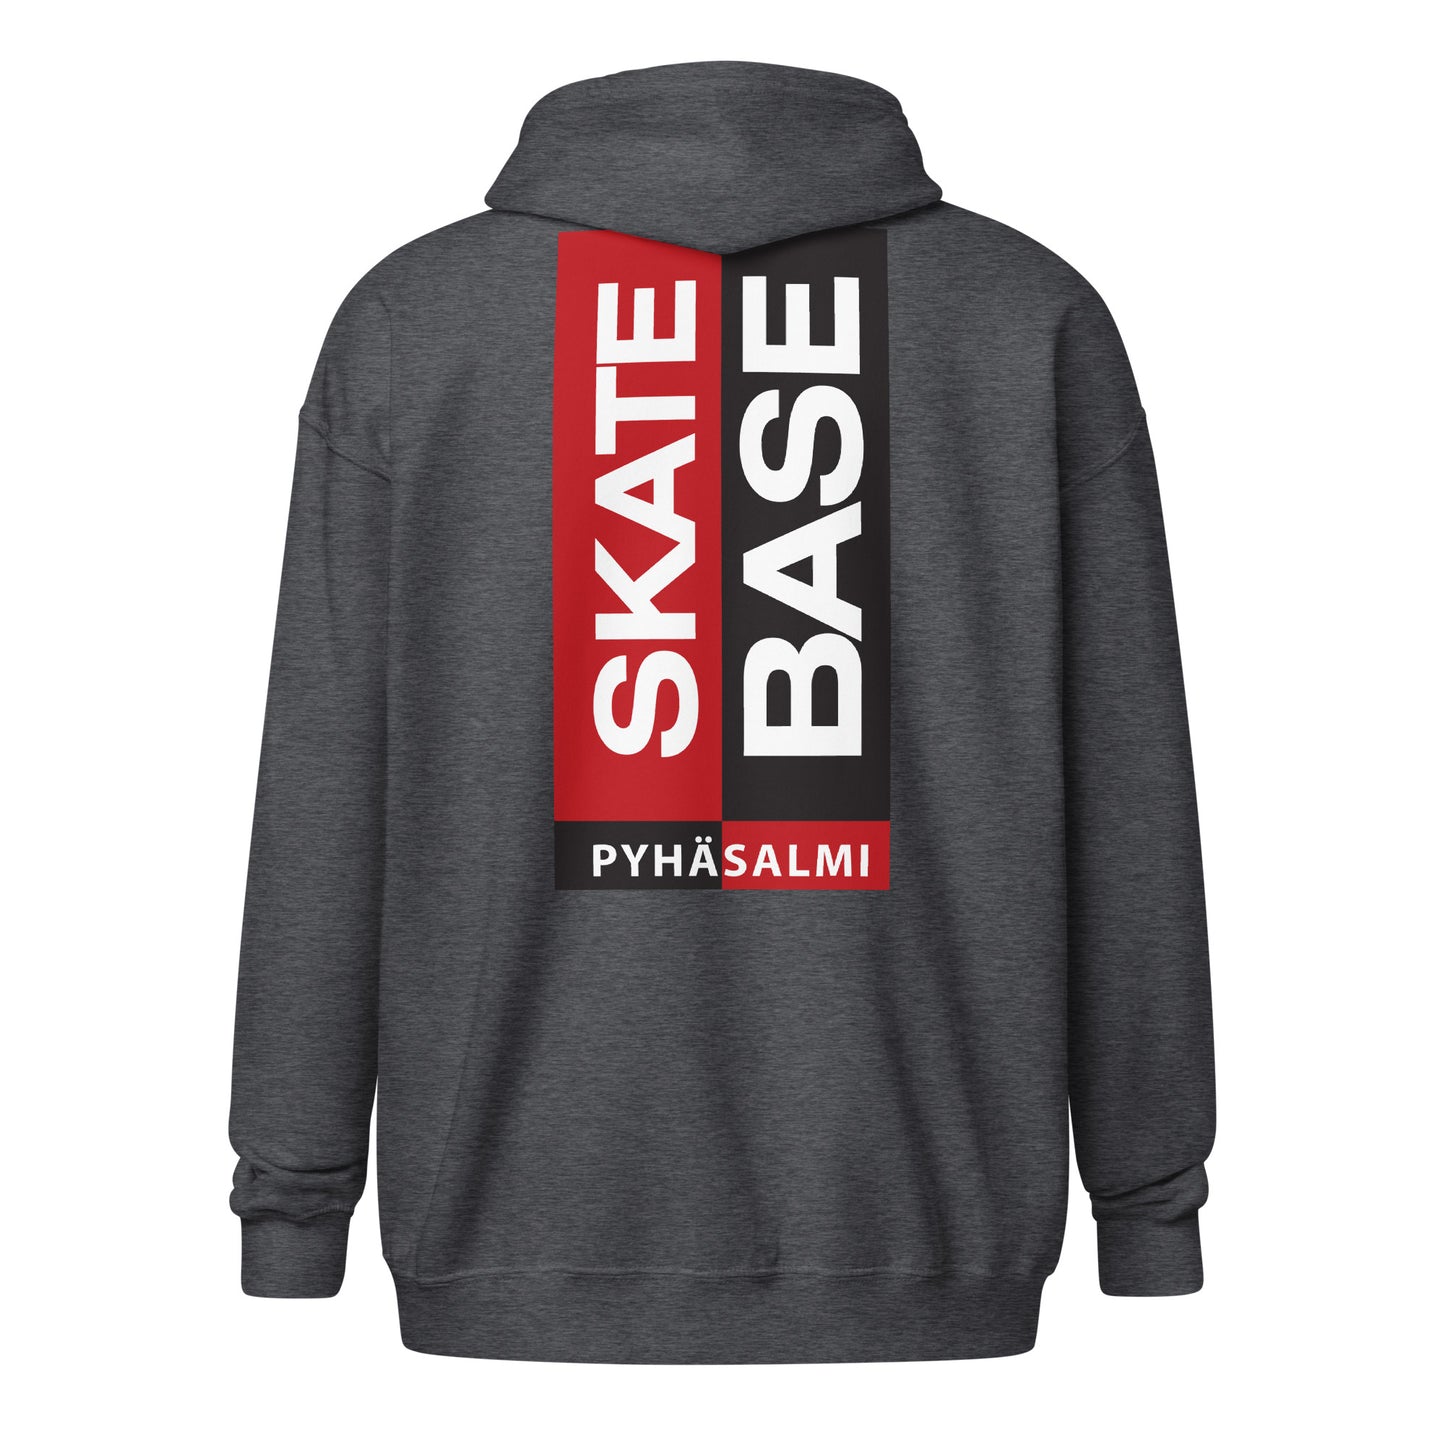 "Skate Base" unisex hoodie with zipper (front and back printing)